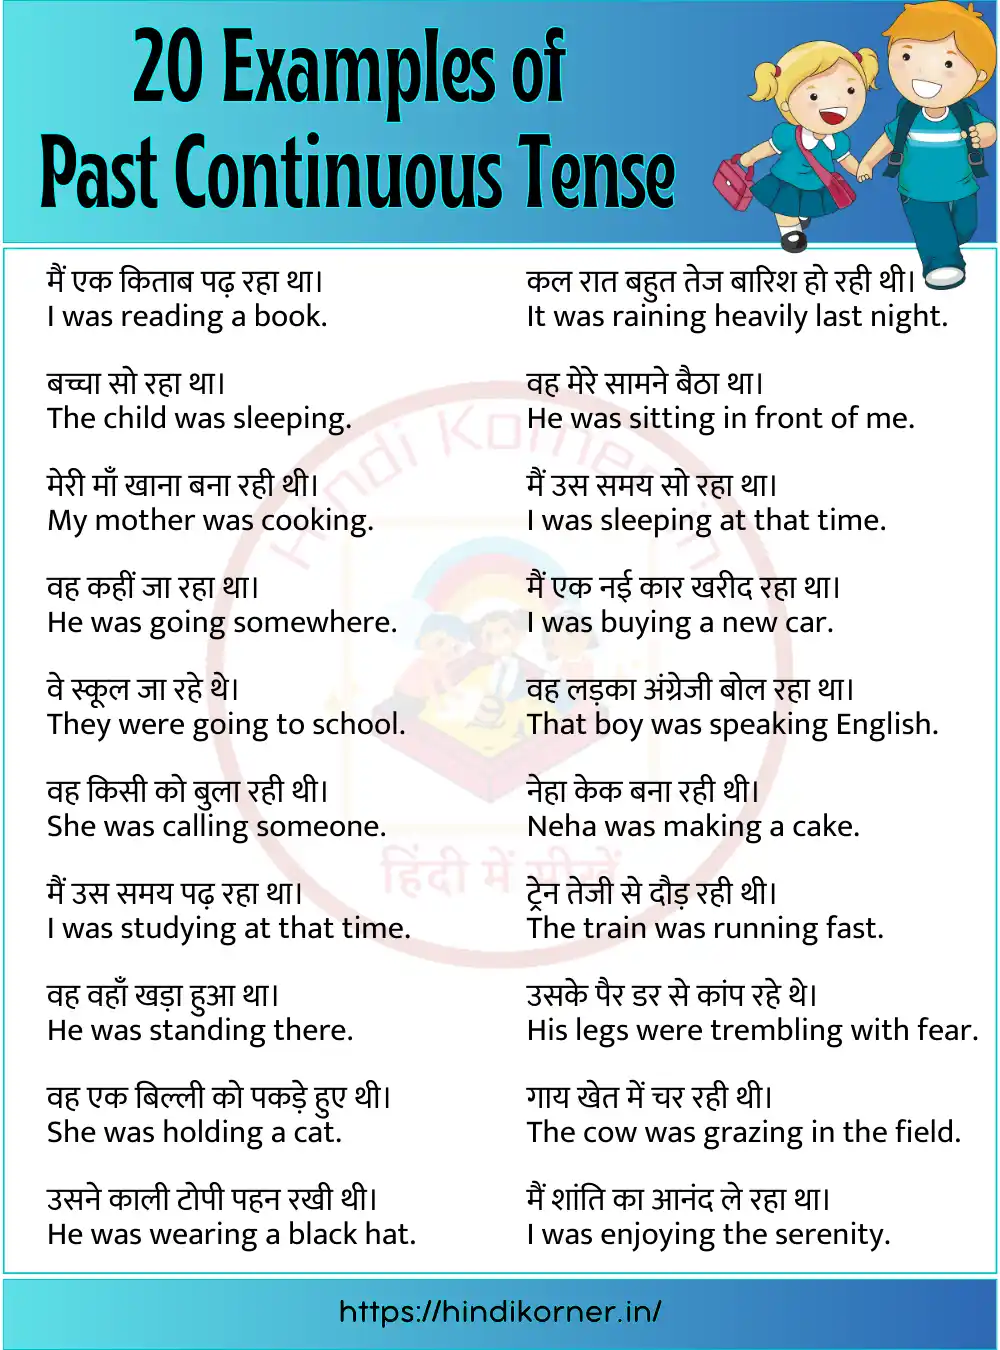 20 Past Continuous Tense Examples In Hindi